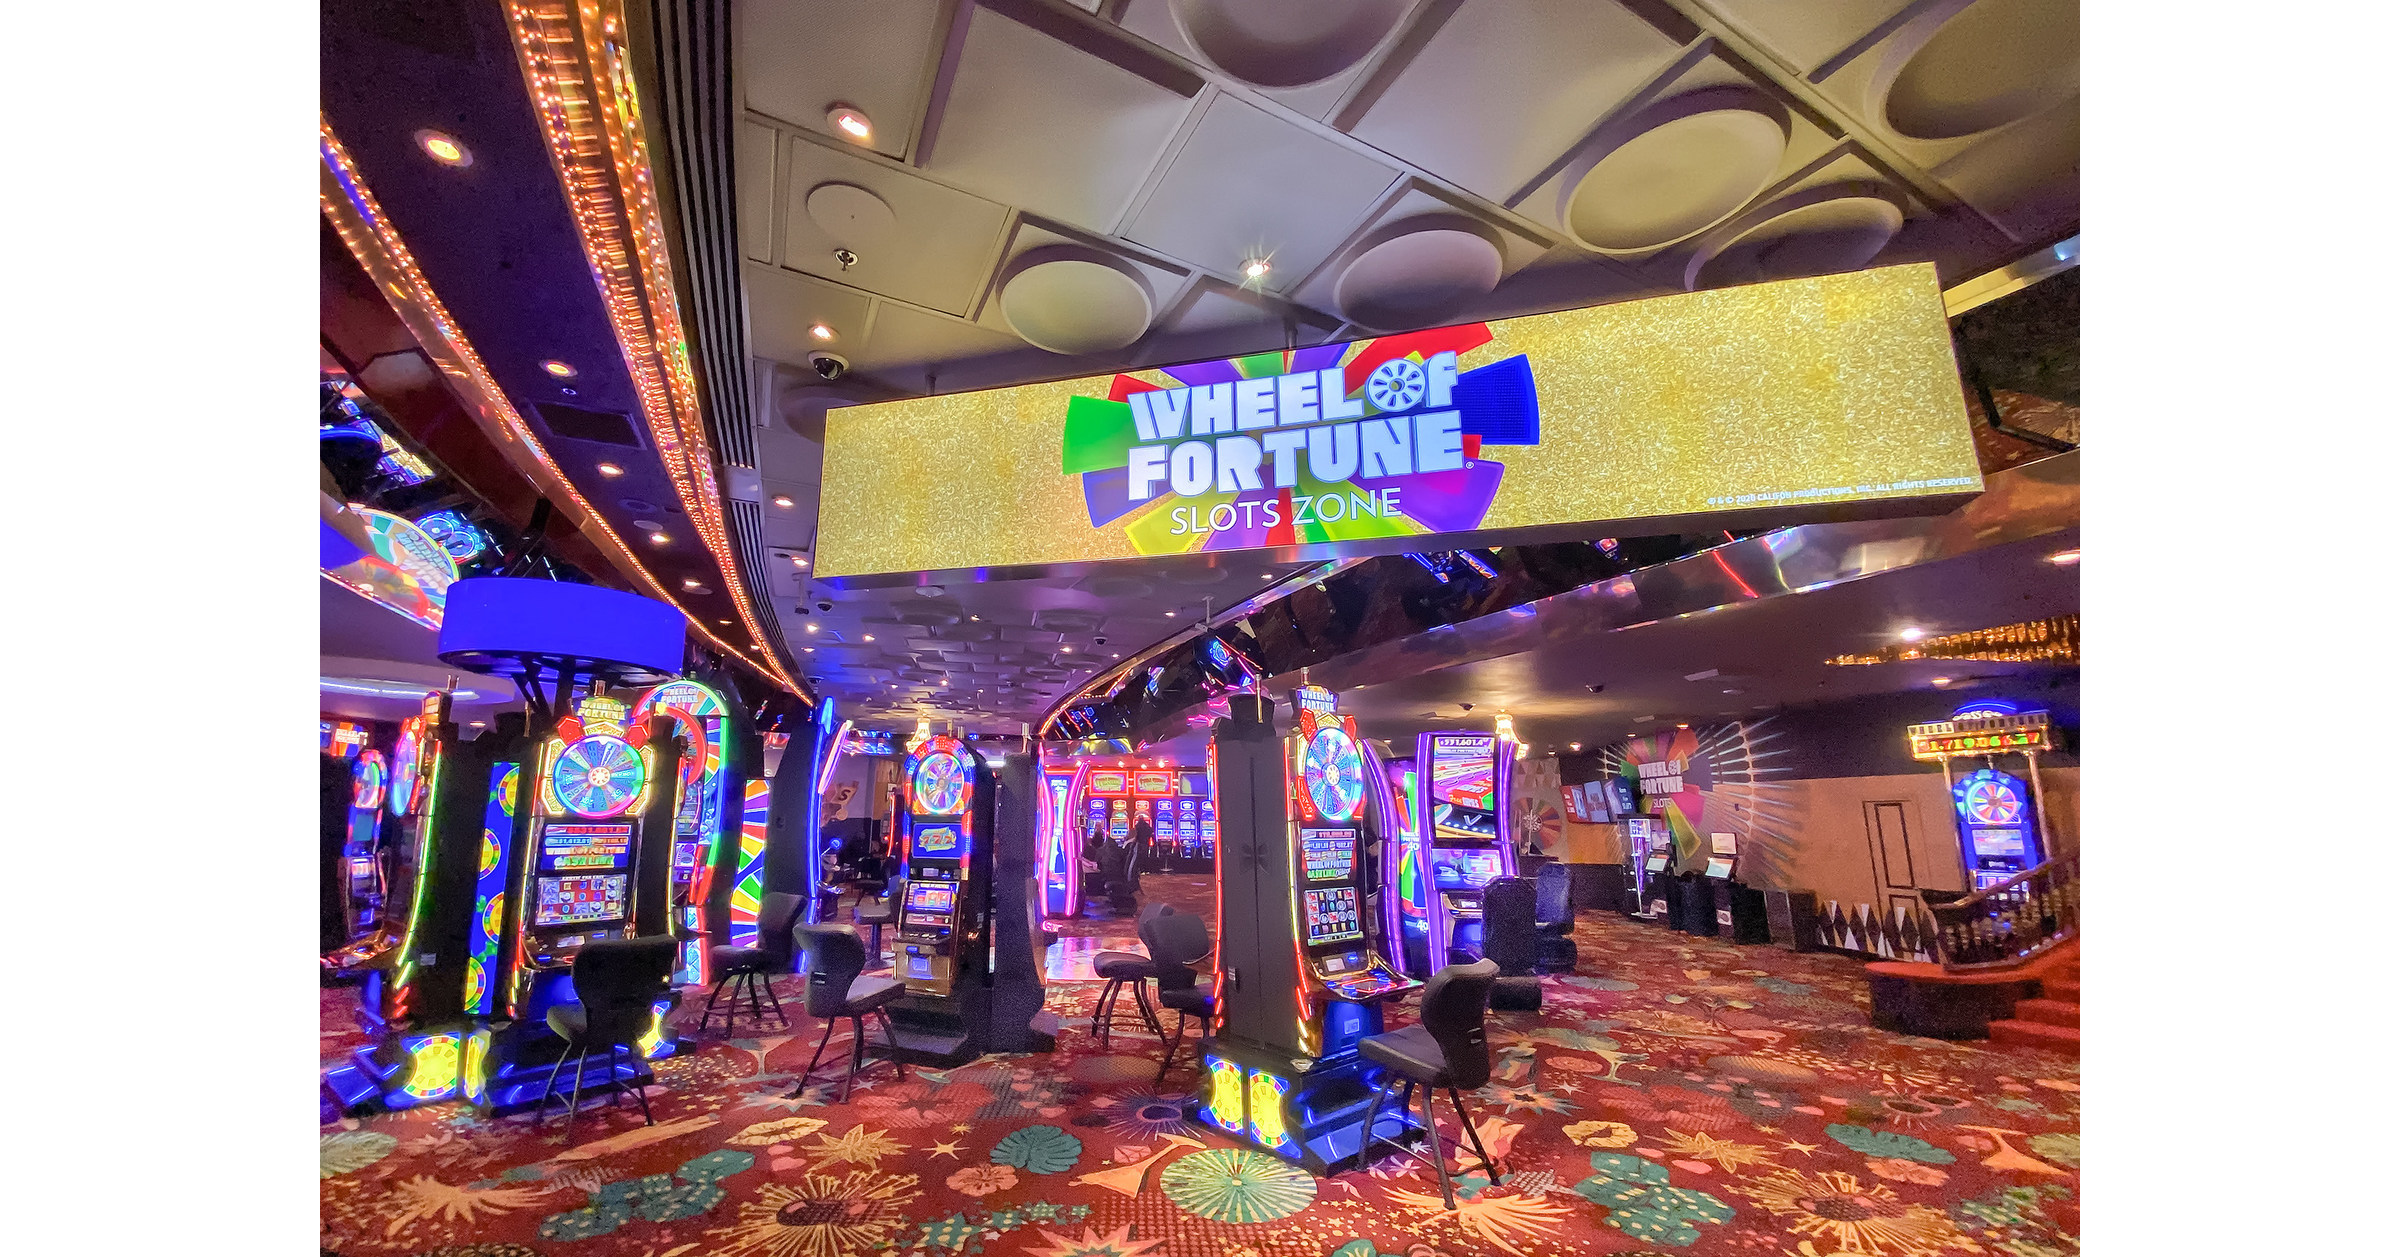 IGT and the Plaza Hotel & Casino Celebrate Life-Changing Jackpots with Las Vegas' Exclusive Wheel of Fortune® Slots Zone